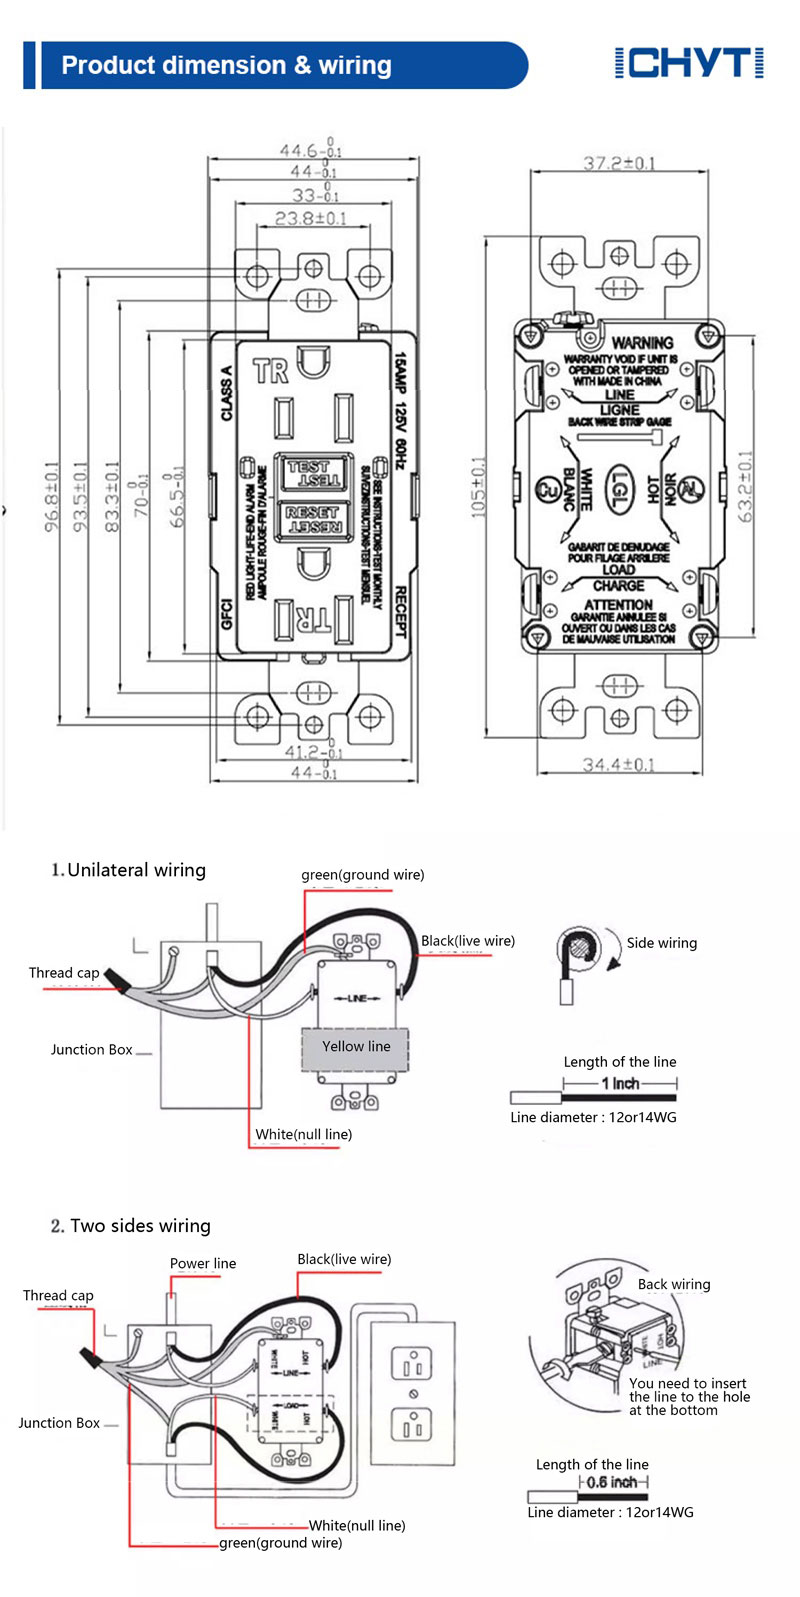 Ground Fault Circuit Interrupter Outlets